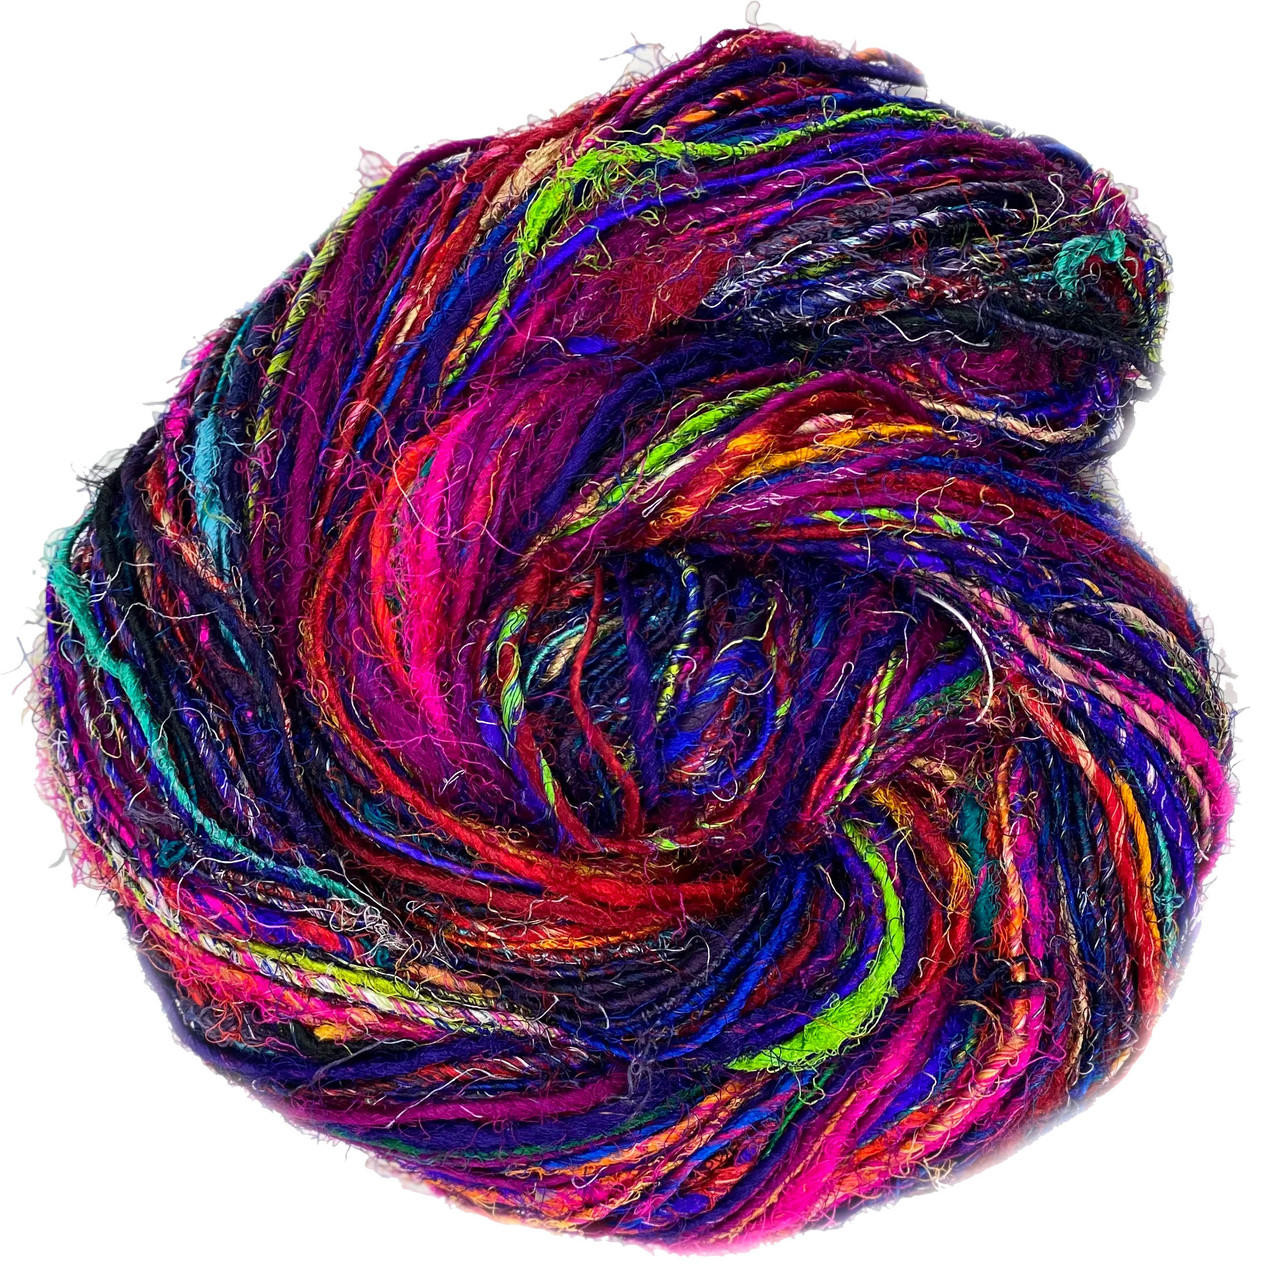 8bundles 100%real mulberry silk,hand-dyed embroidery silk floss